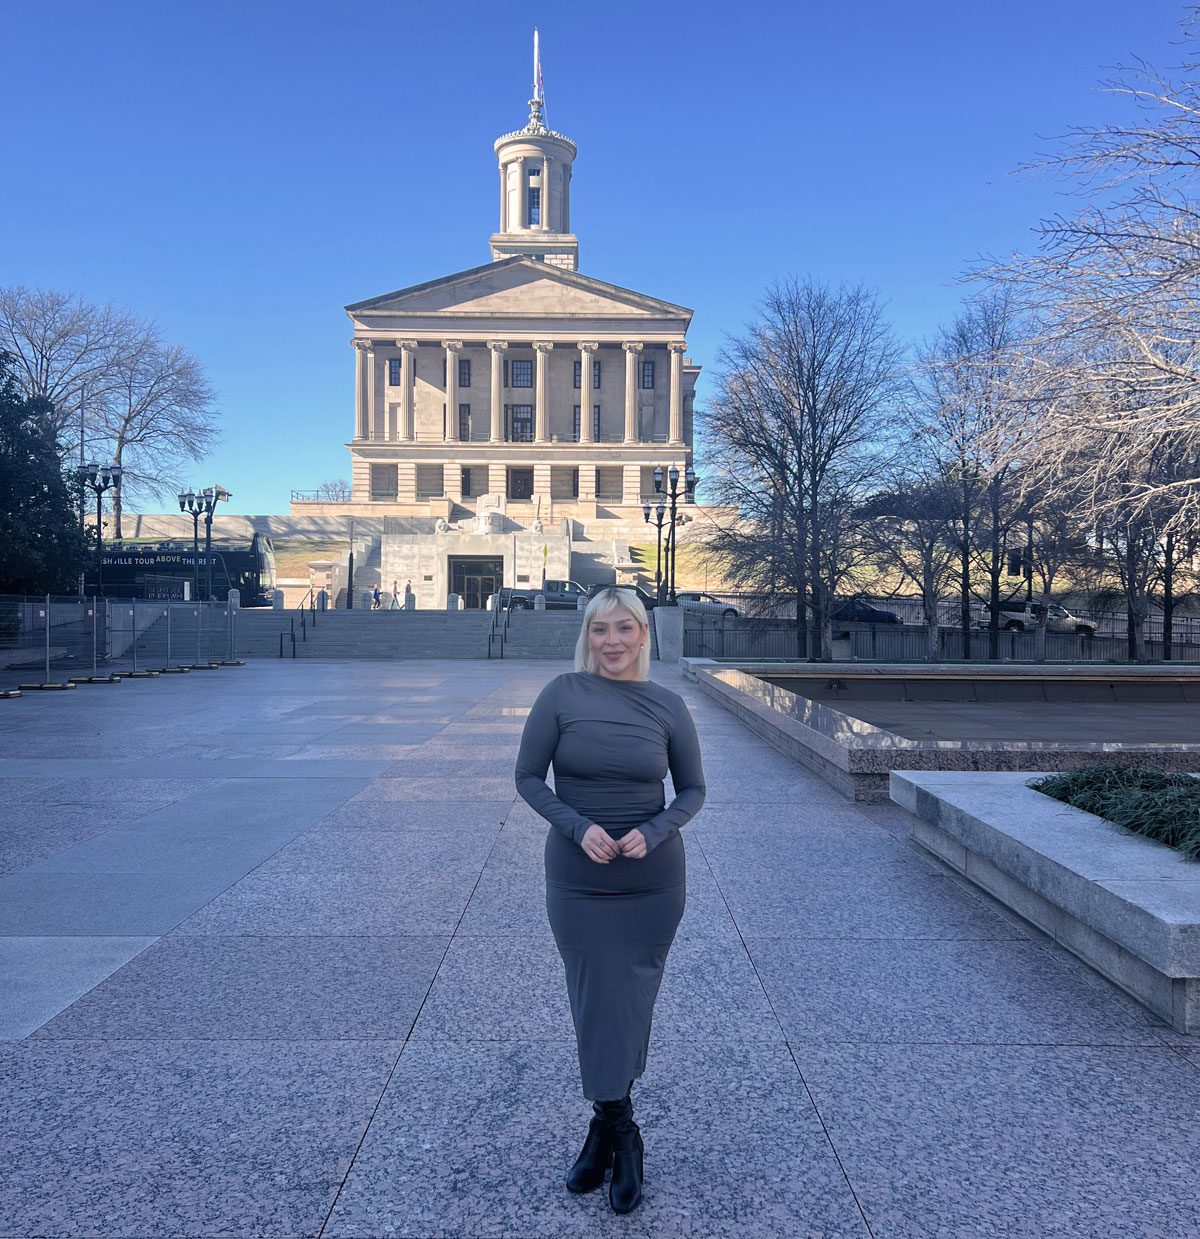 Jennifer Azrate stands on a paved walkway with the Tennessee capitol building in the background behind her.